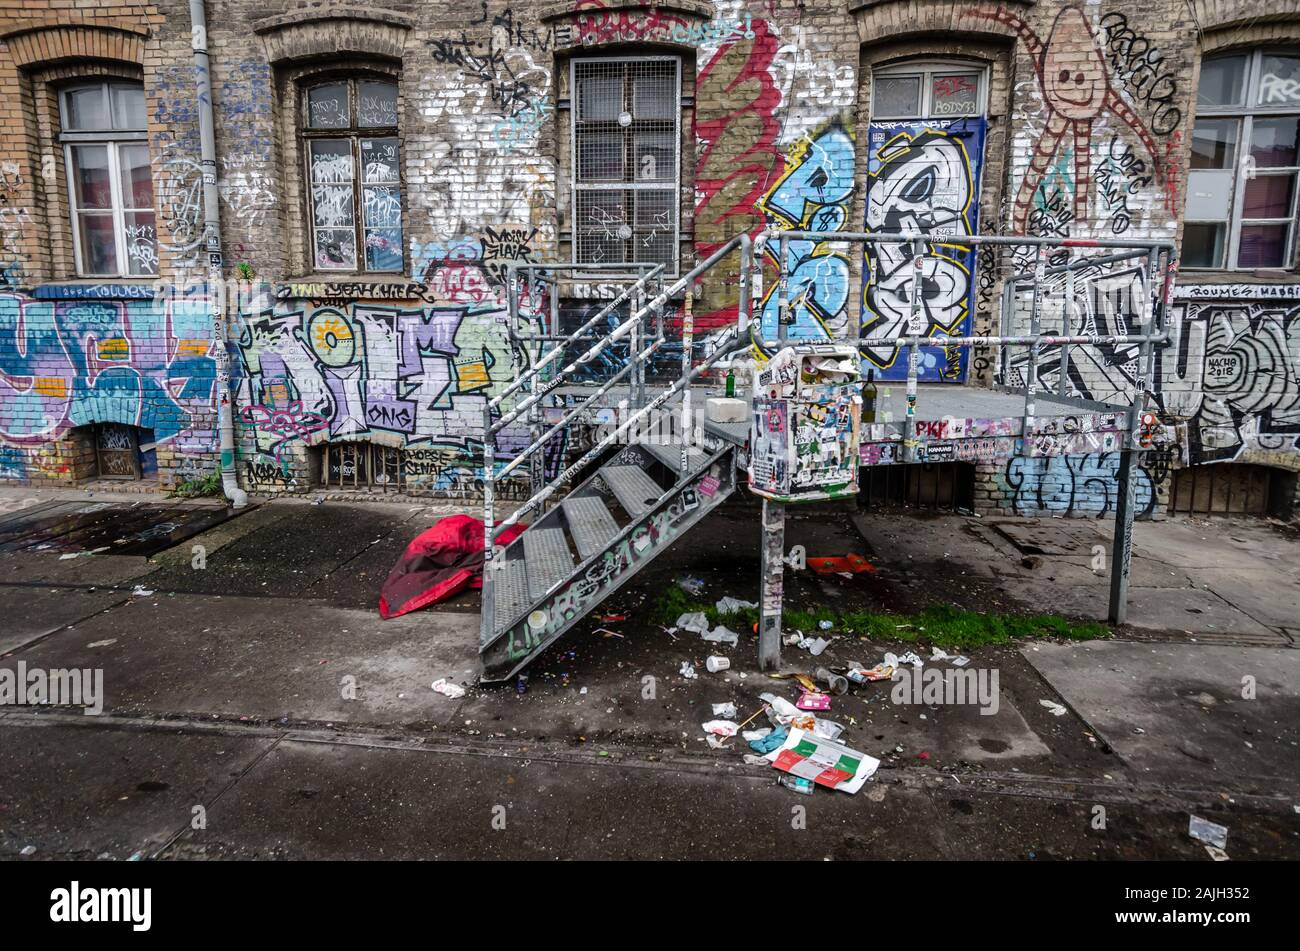 BERLIN, GERMANY - SEPTEMBER 1, 2017: View of RAW Gelande subcultural compound in Berlin. Stock Photo